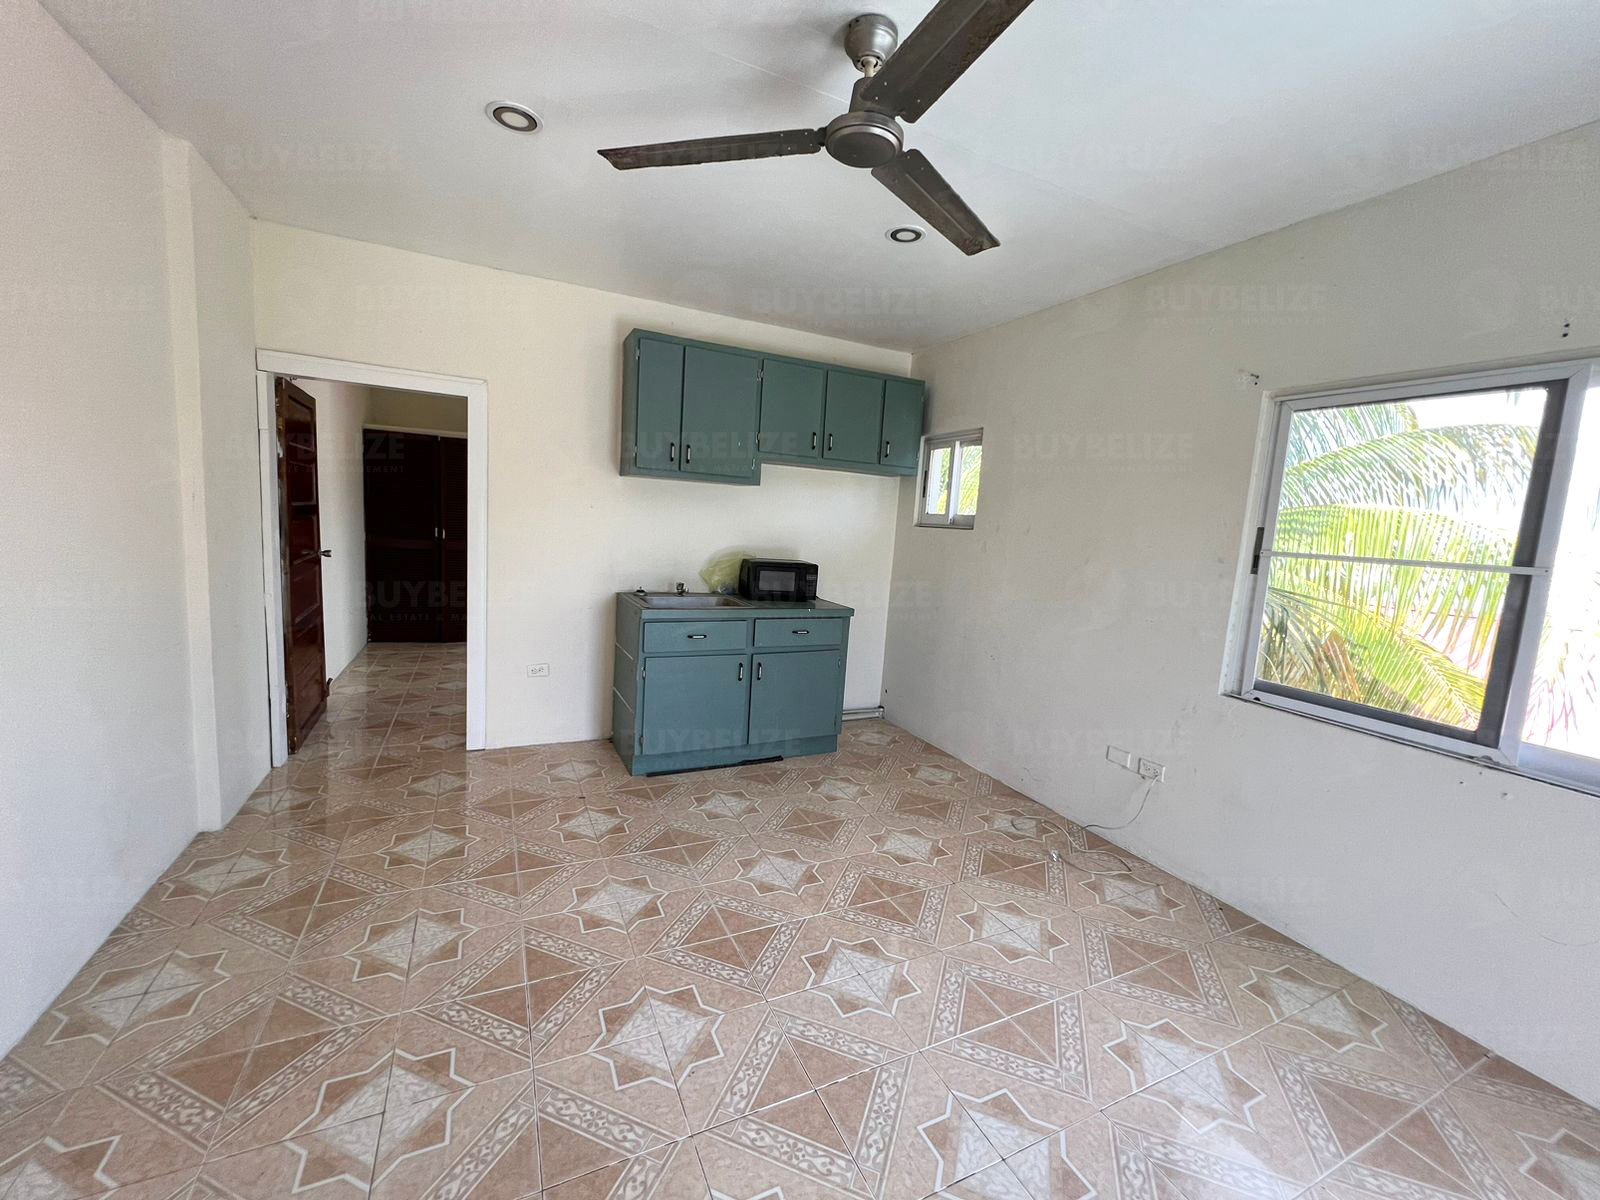 1 Bed 1 Bath Apartment for Rent in Belize City